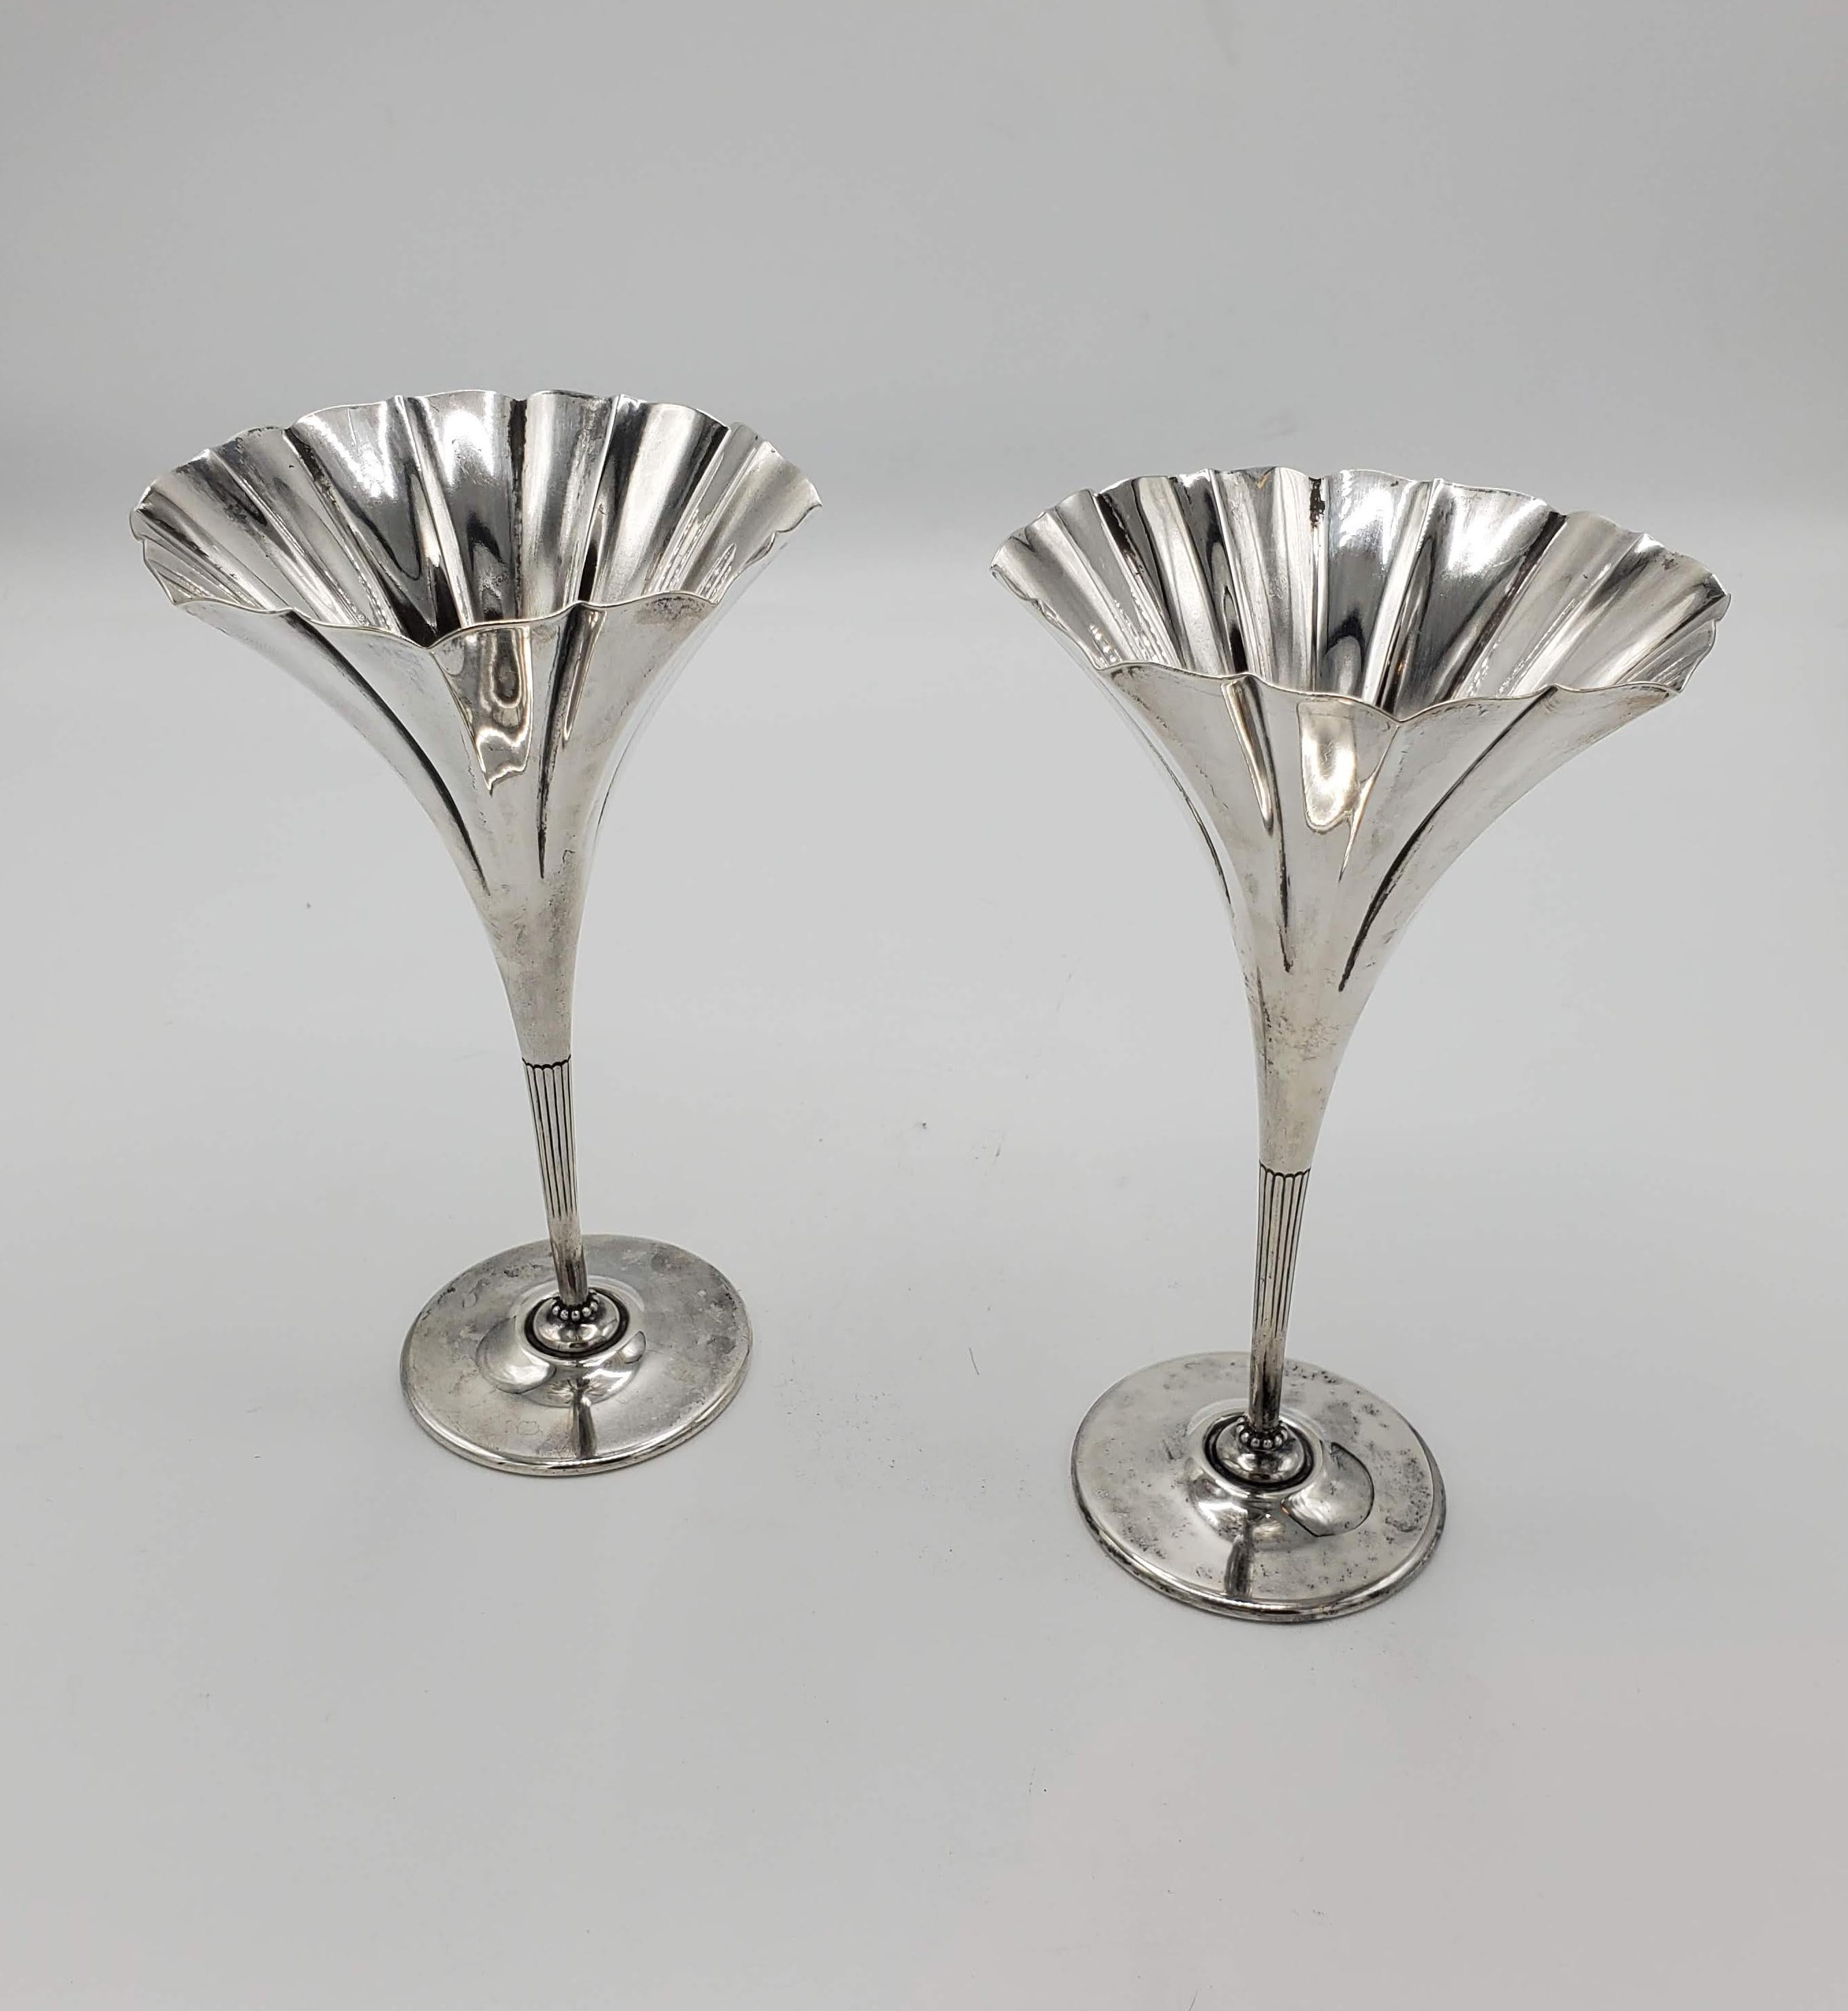 American Pair of Small Tiffany & Co. Art Nouveau Sterling Silver Flower Shaped Vases